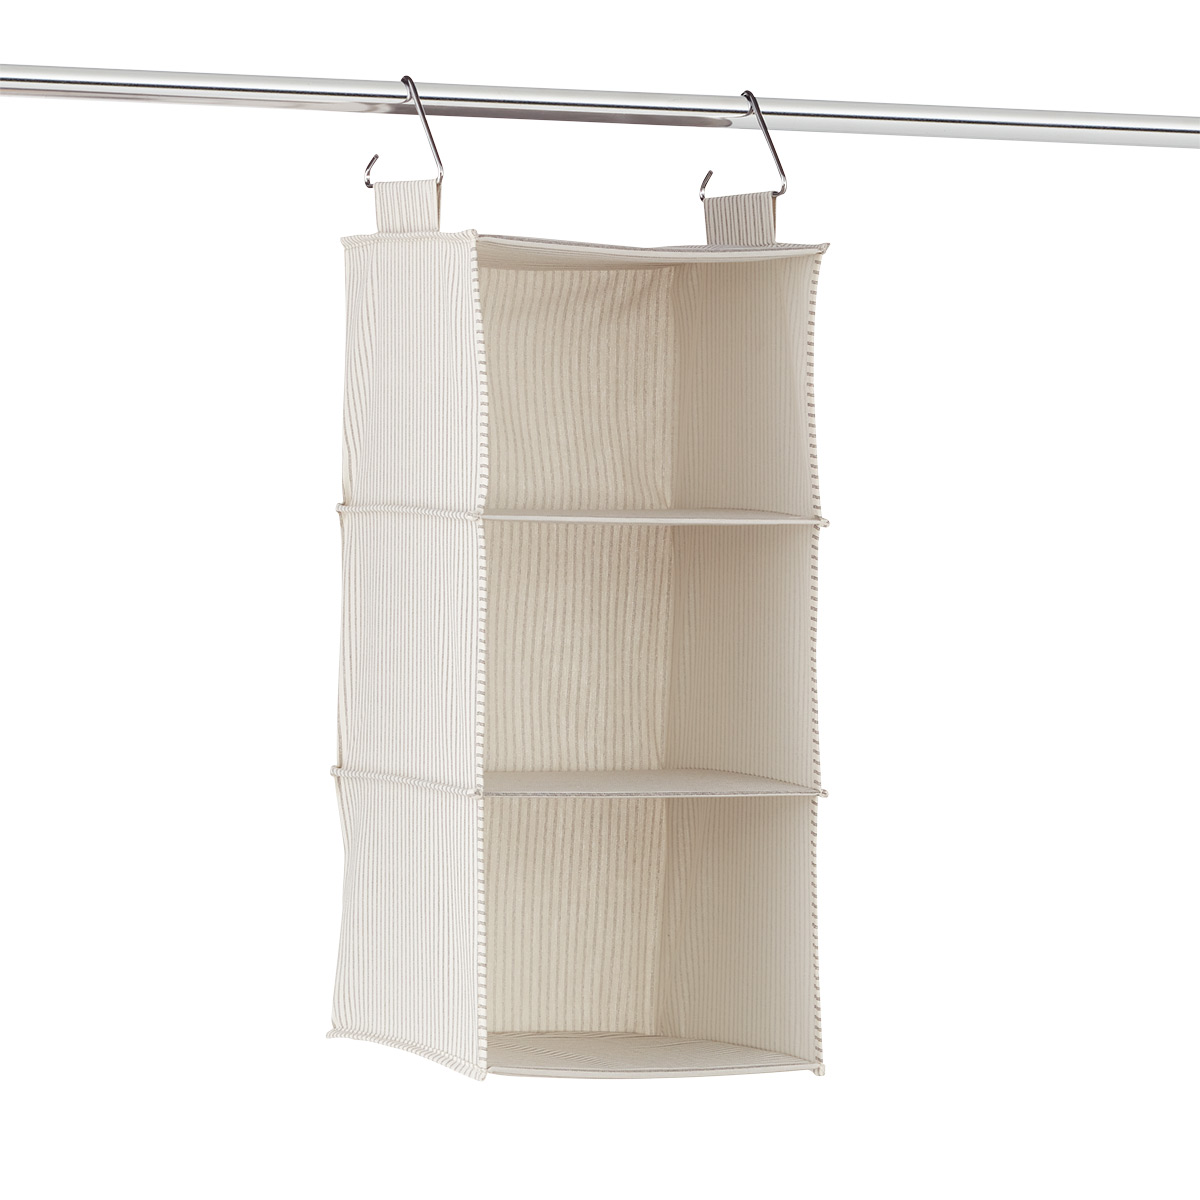 https://www.containerstore.com/catalogimages/482709/10091533-3-compartment-hanging-close.jpg